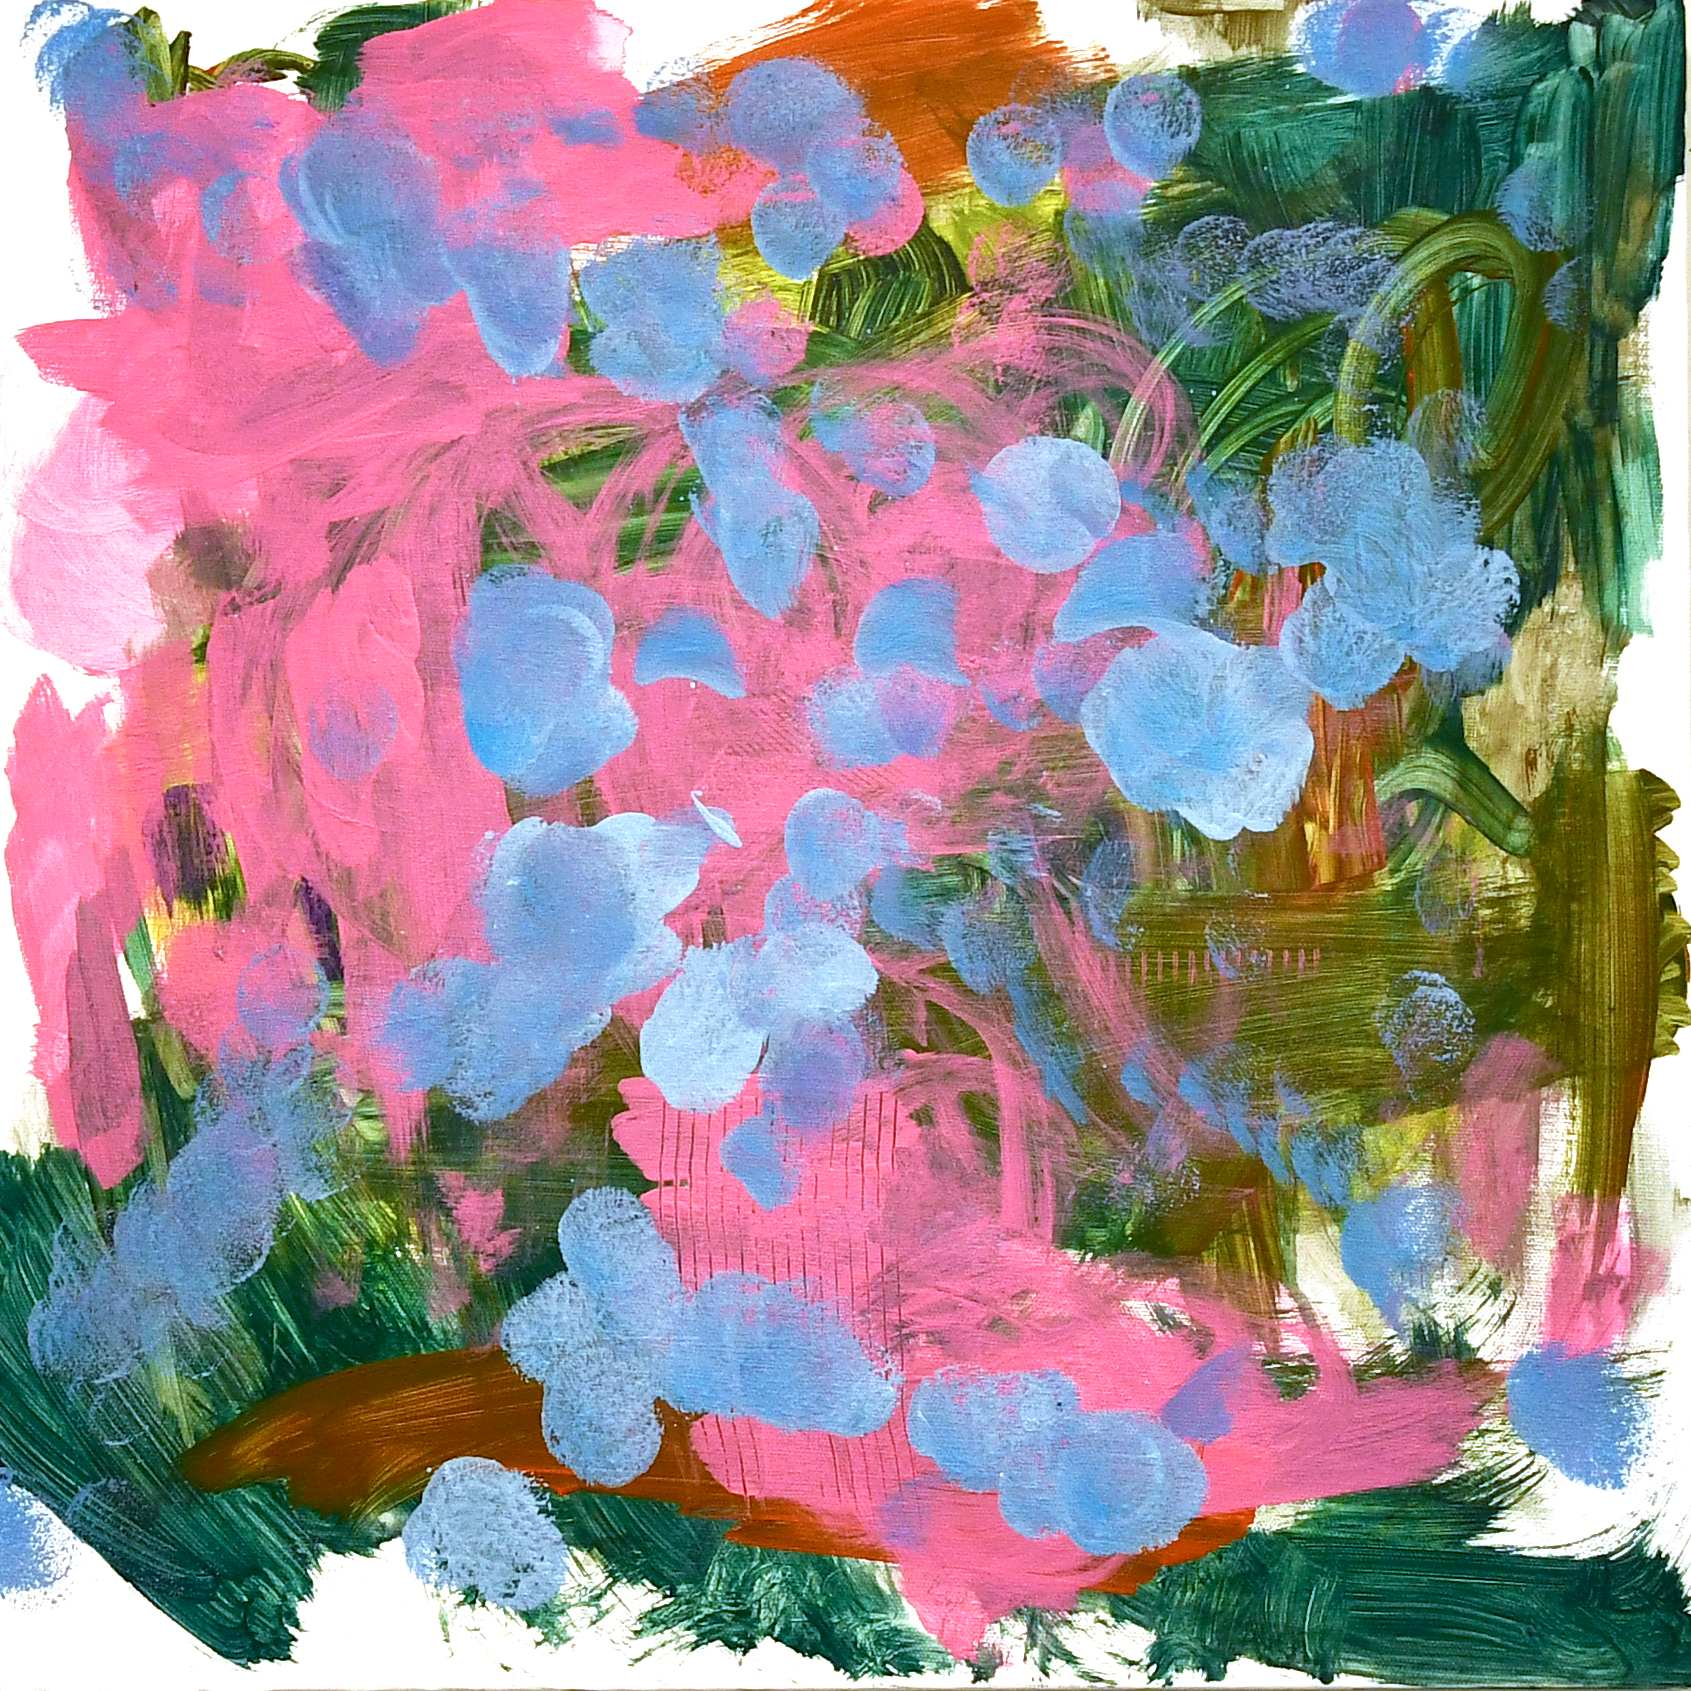 An abstract painting layered with a few different shades of green, pink, orange, and brown on top of a white background. Scattered throughout are baby blue circles.